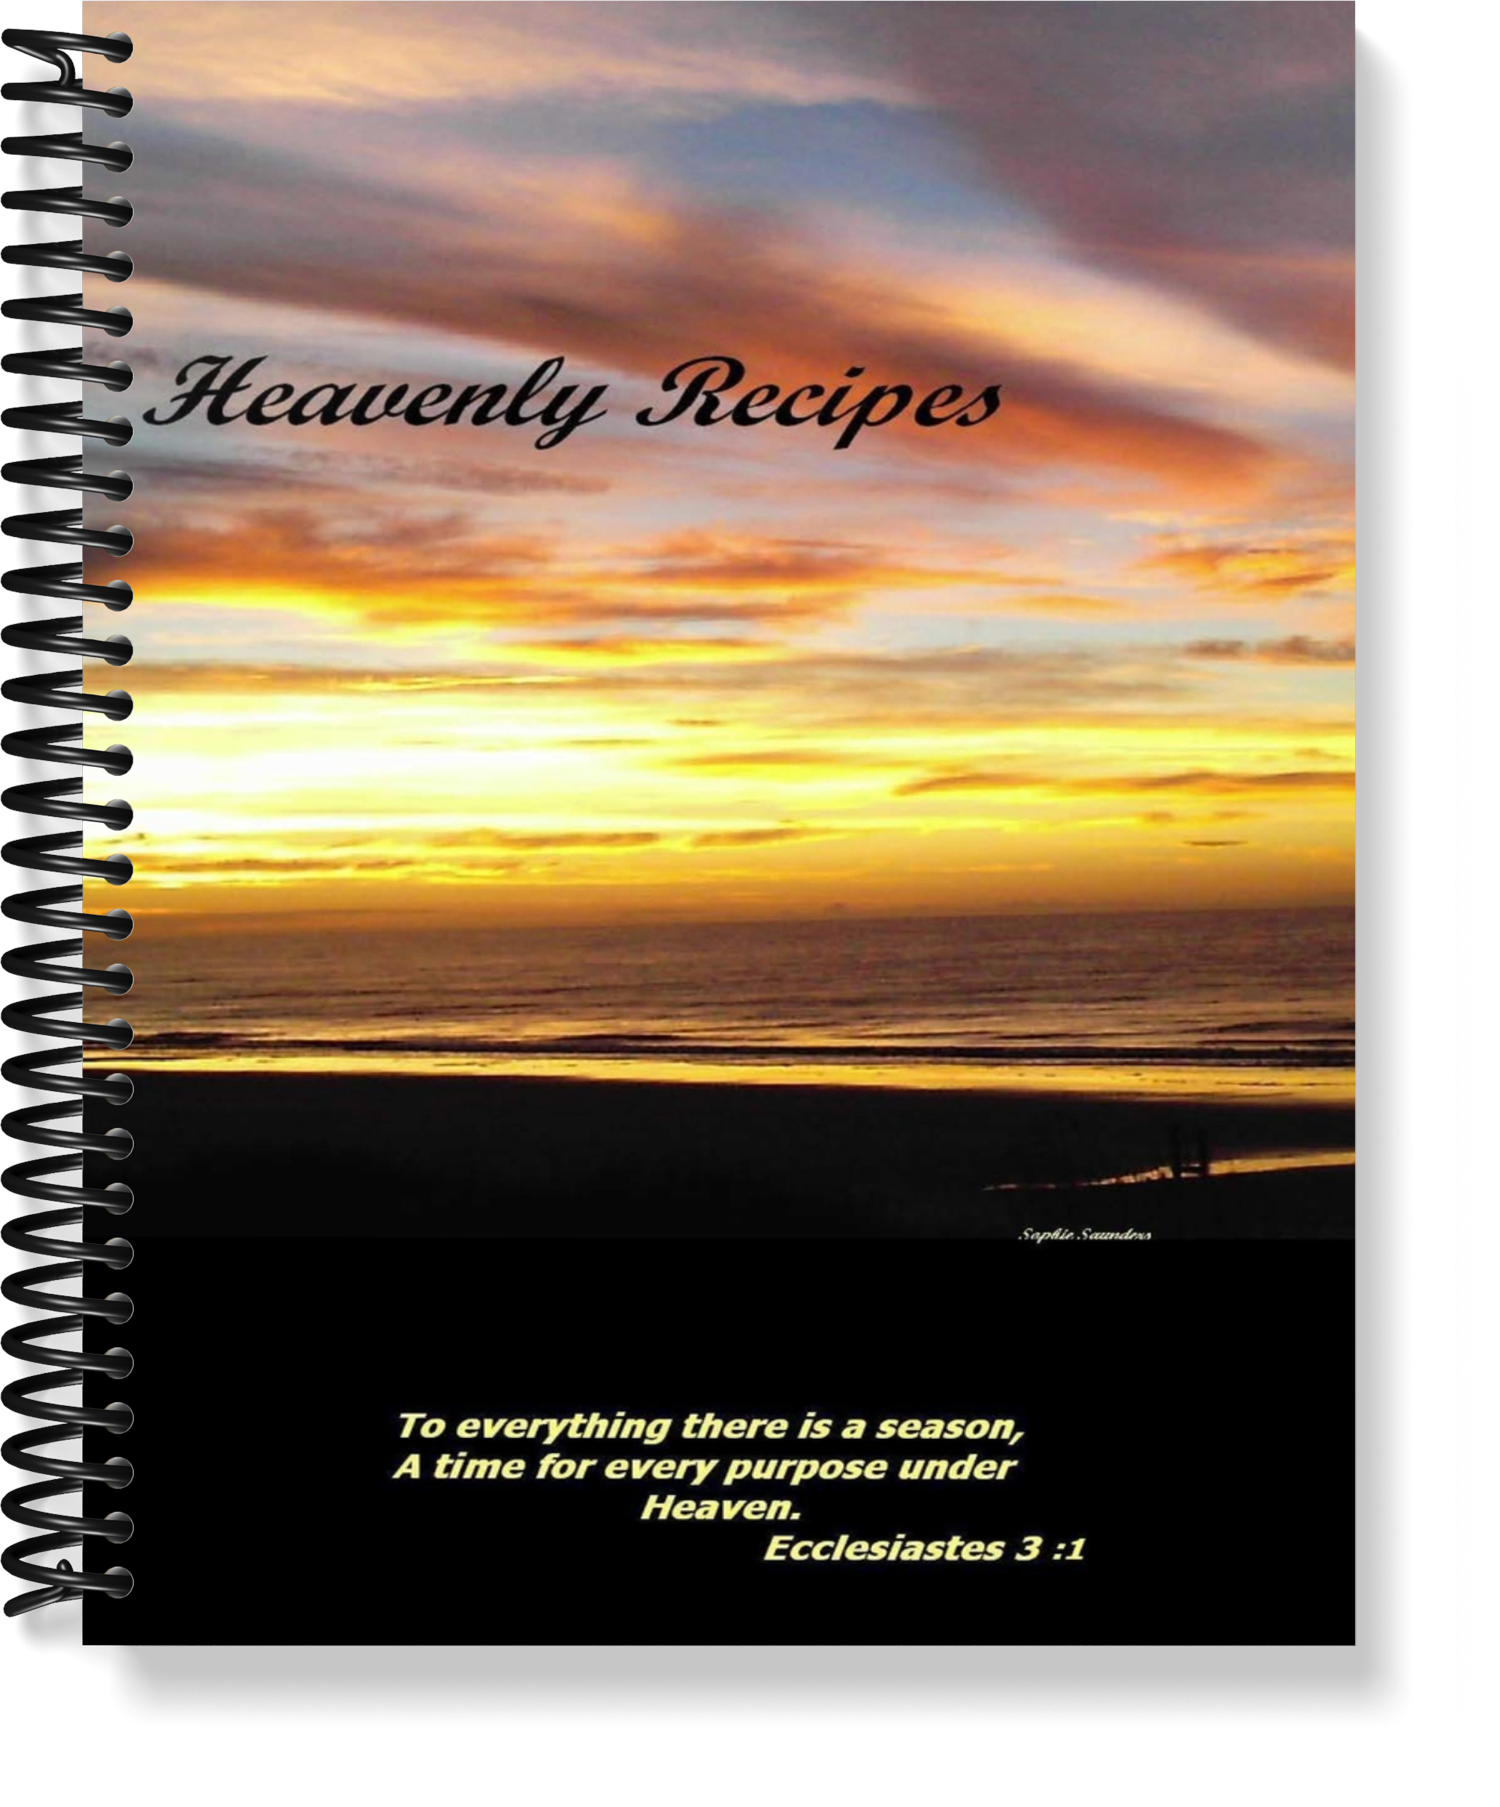 Profitable Fundraising community cookbook Heavenly Recipes - Created in Support of the 2008 American Cancer Society DeLand Relay For Life fundraising cookbook